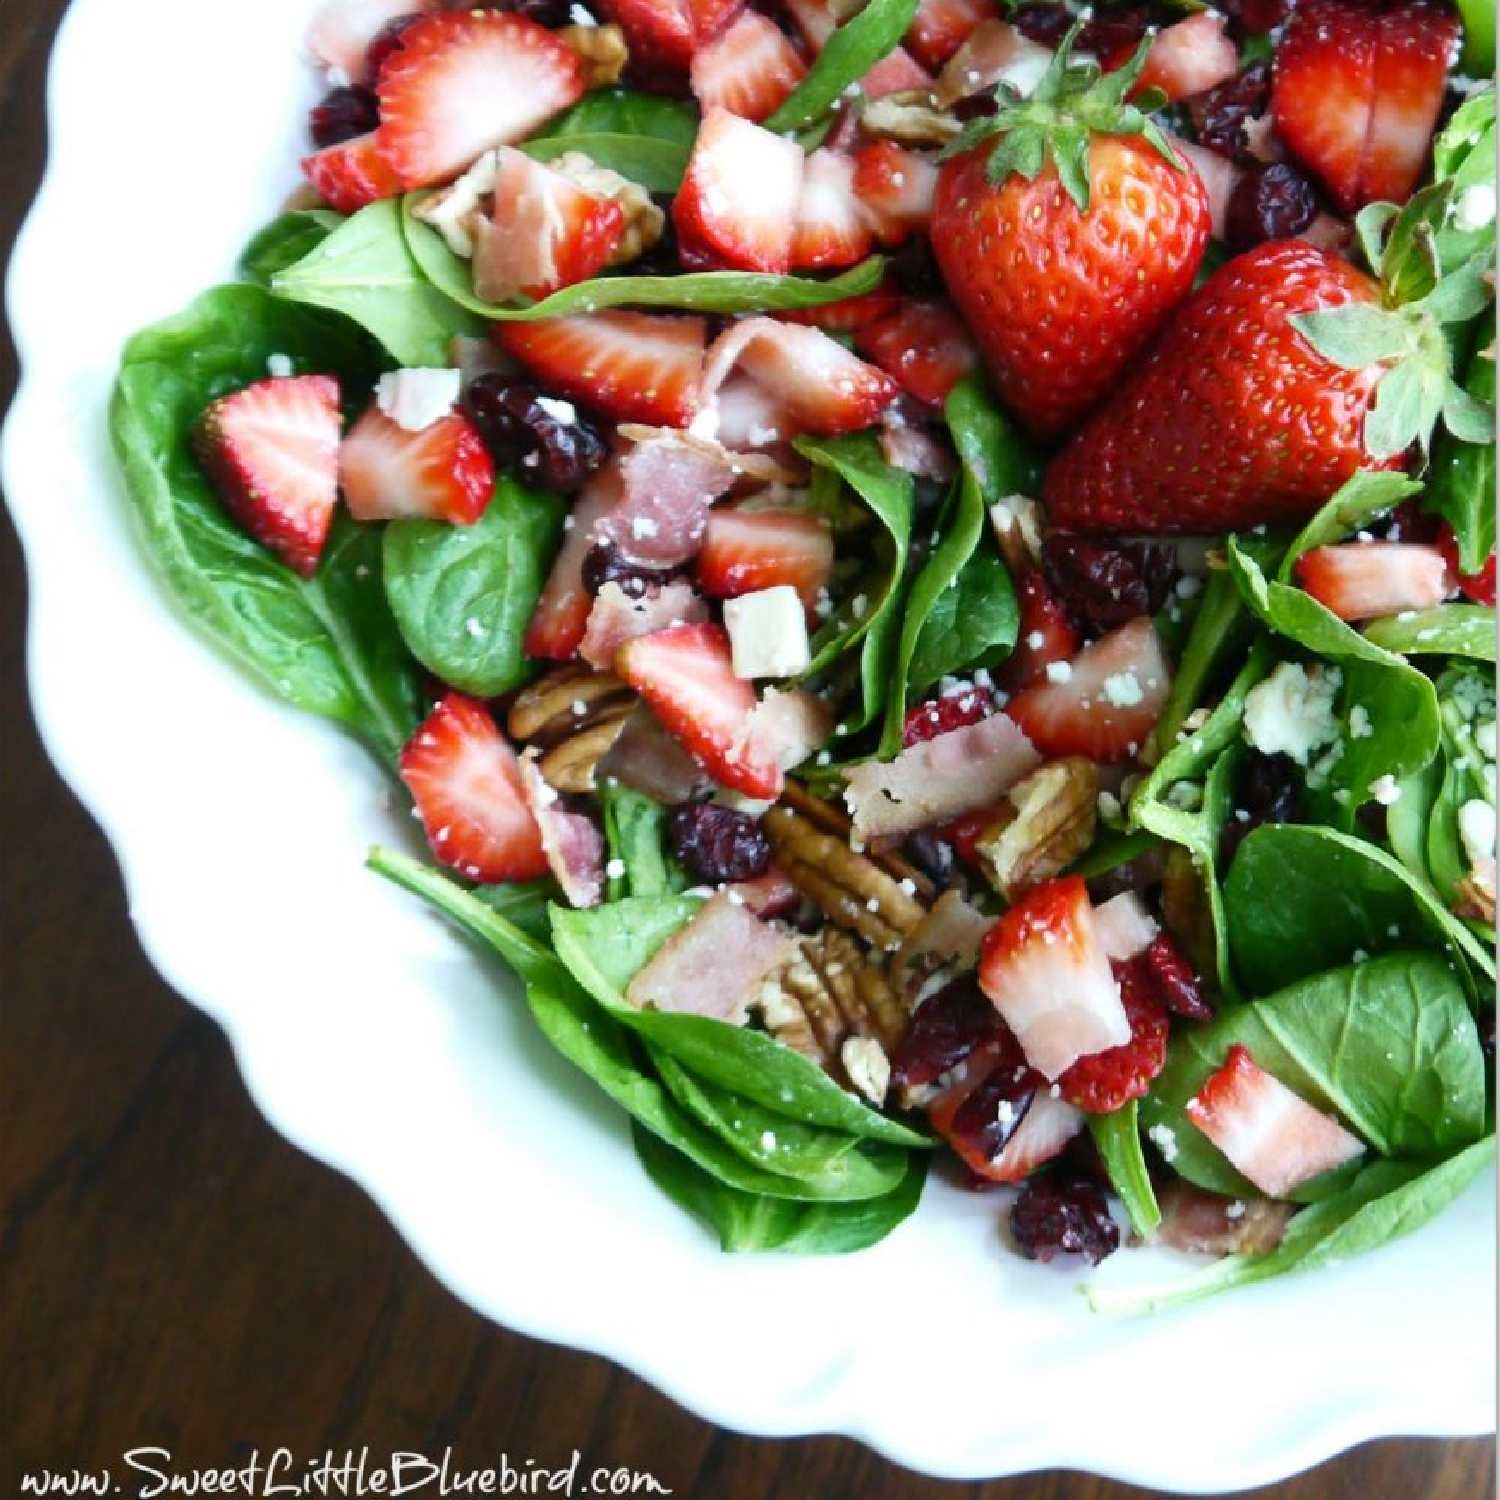 This photo shows strawberry spinach salad in a white serving bowl.